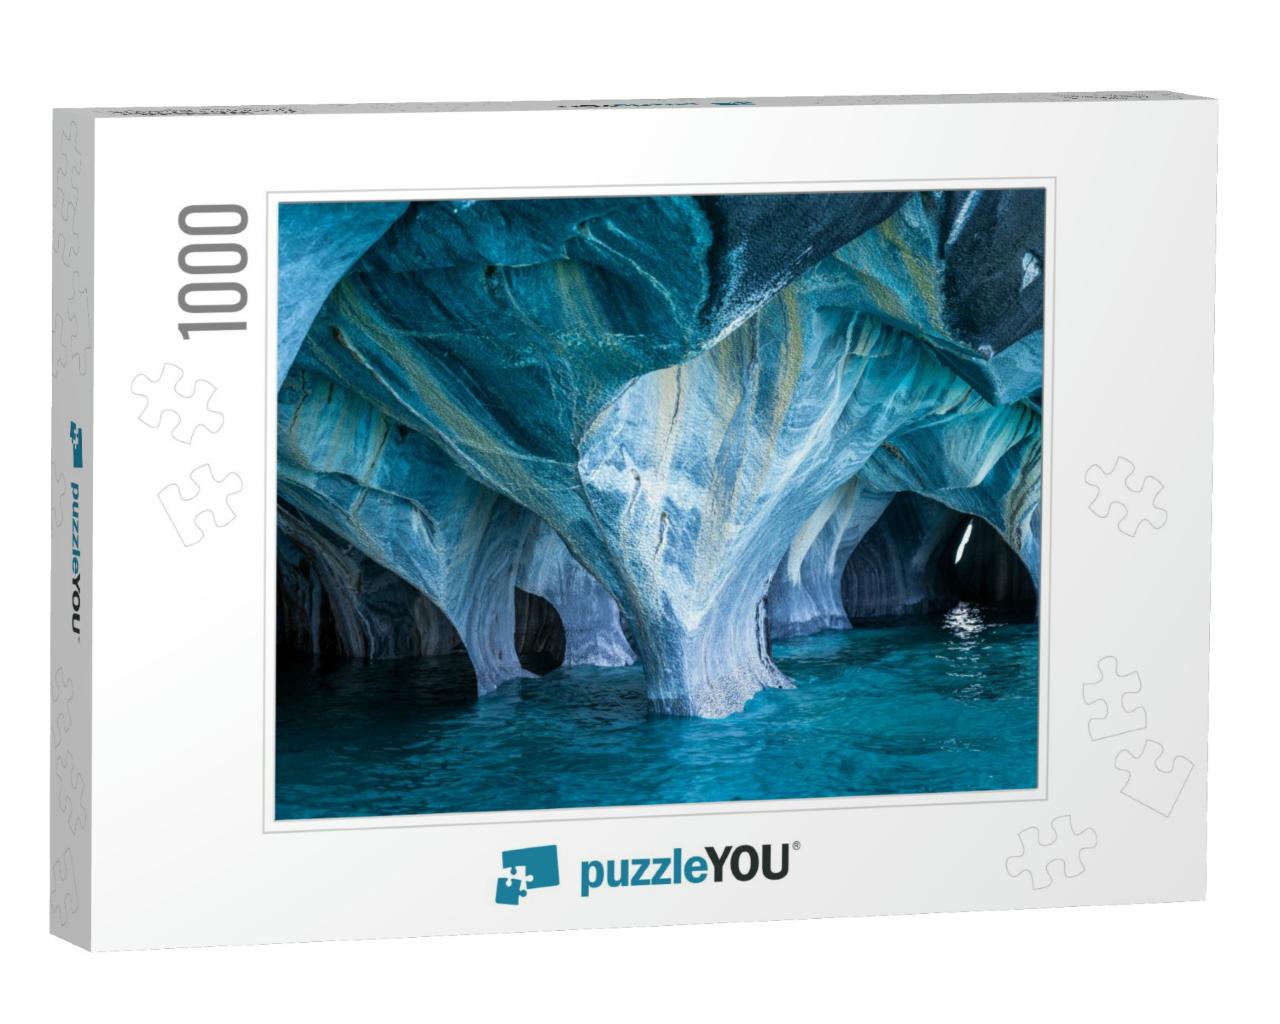 The Marble Caves Spanish Cuevas De Marmol Are a Series of... Jigsaw Puzzle with 1000 pieces